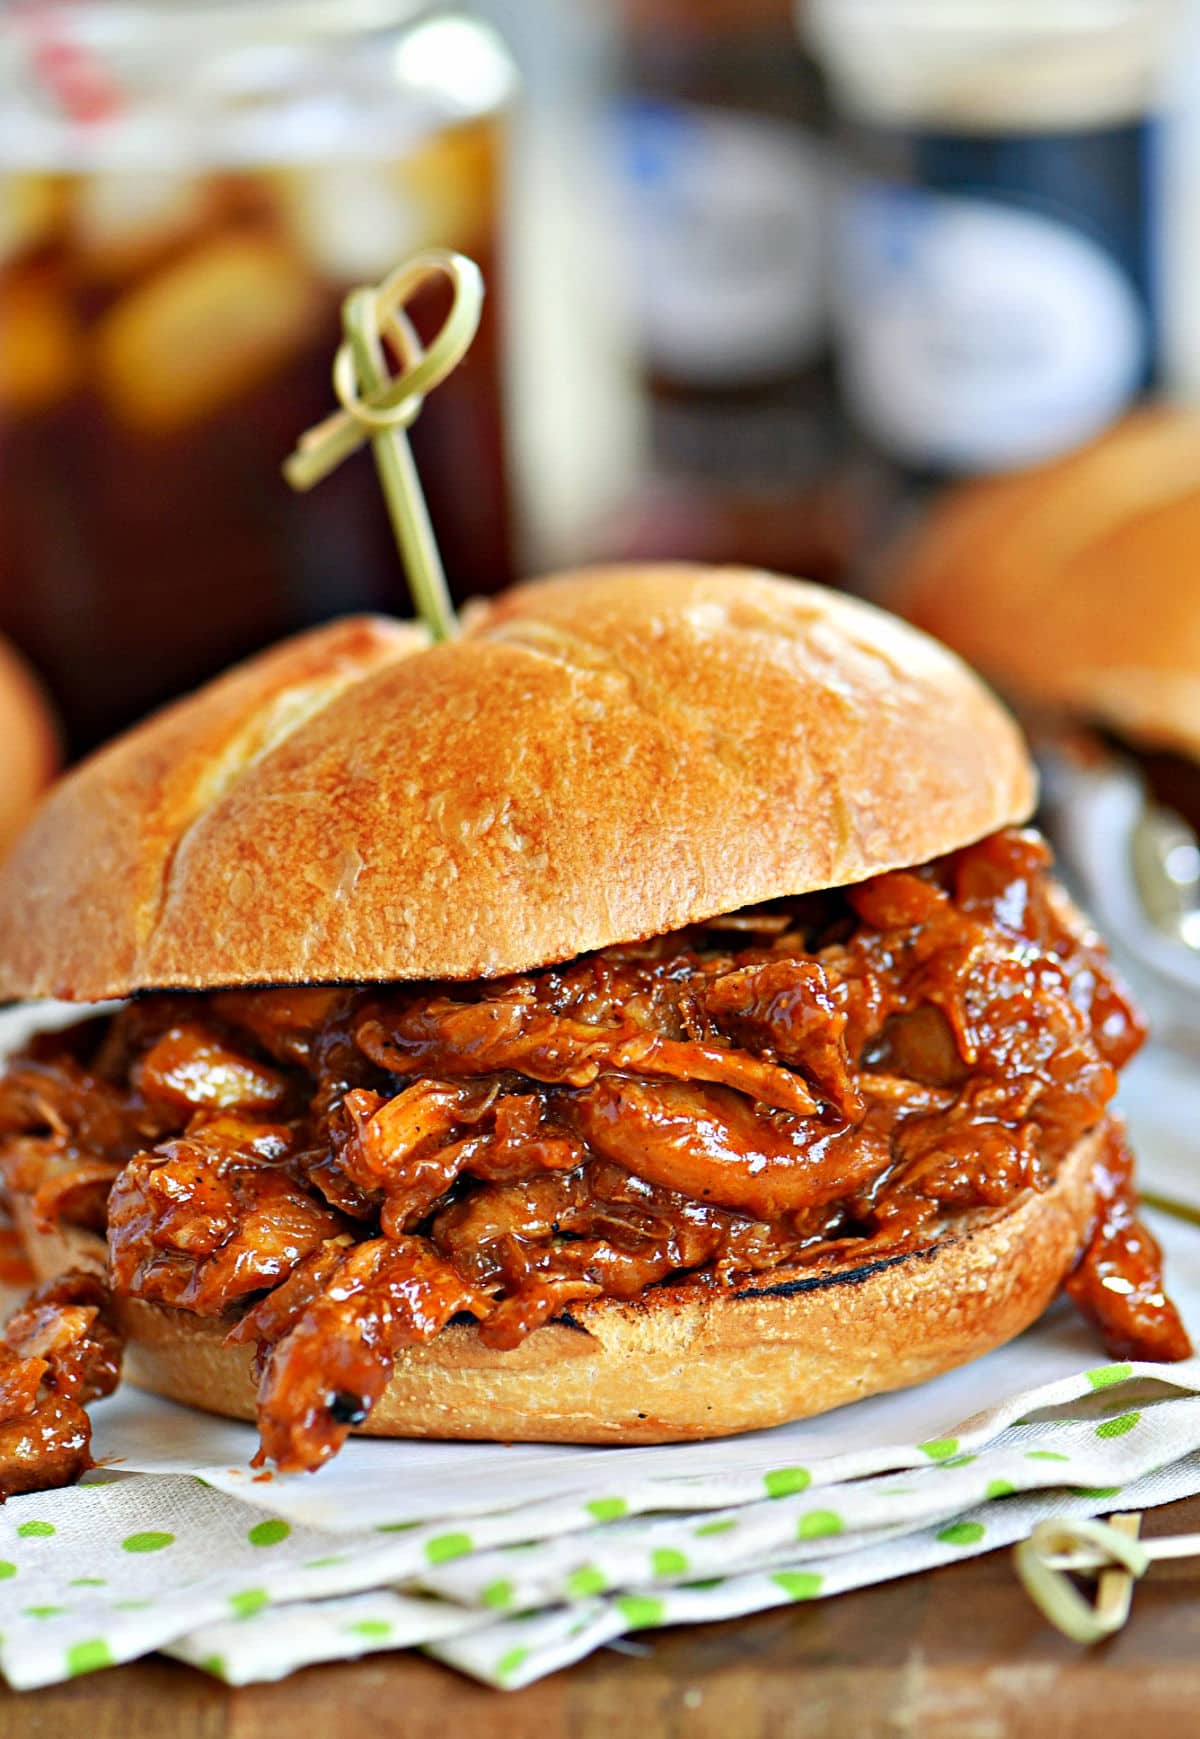 bbq chicken sandwich made with pulled chicken. Sitting on a green and white napkin.